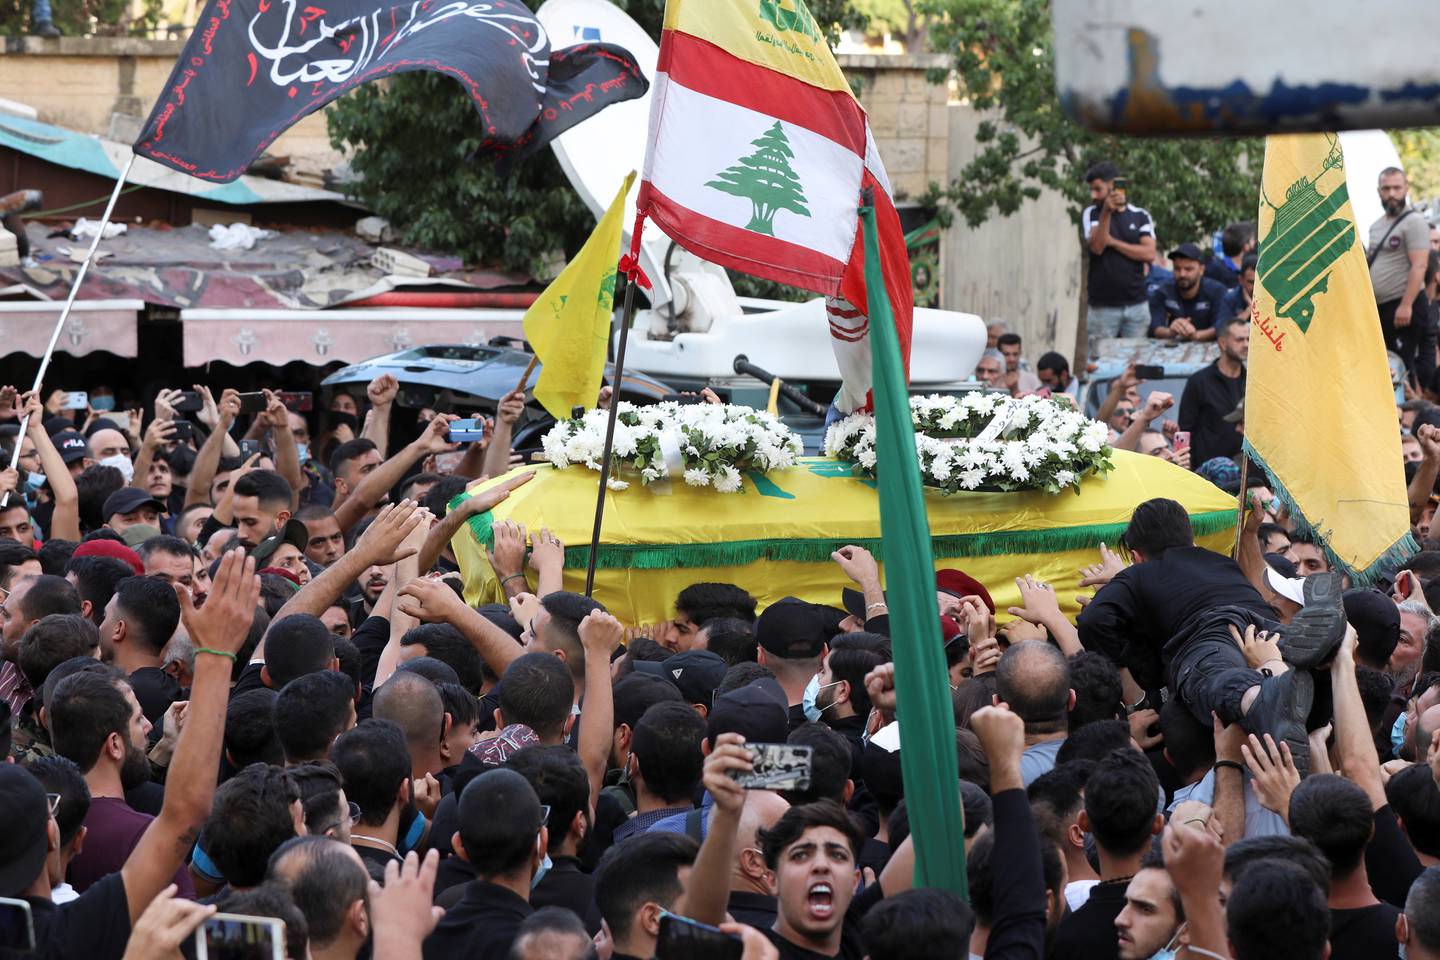 Supporters of Lebanon's Hezbollah carry a coffin of a person who was killed in violence in Beirut on Thursday, during a funeral in Beirut's southern suburbs. Reuters